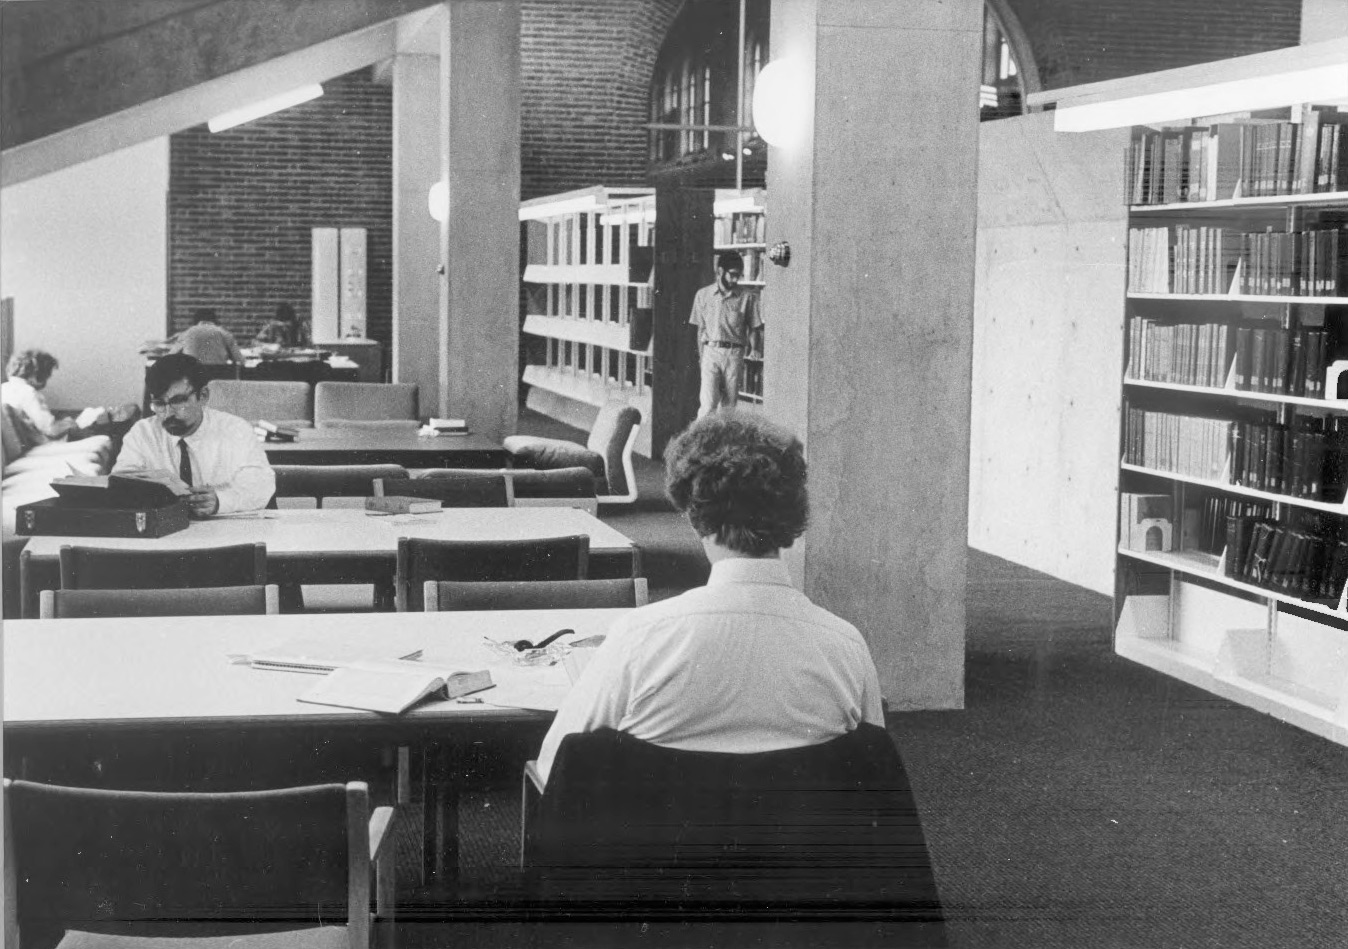 Stacks, 2 students in neckties sitting at tables. The structure comprises concrete columns supporting a sloped concrete slab.